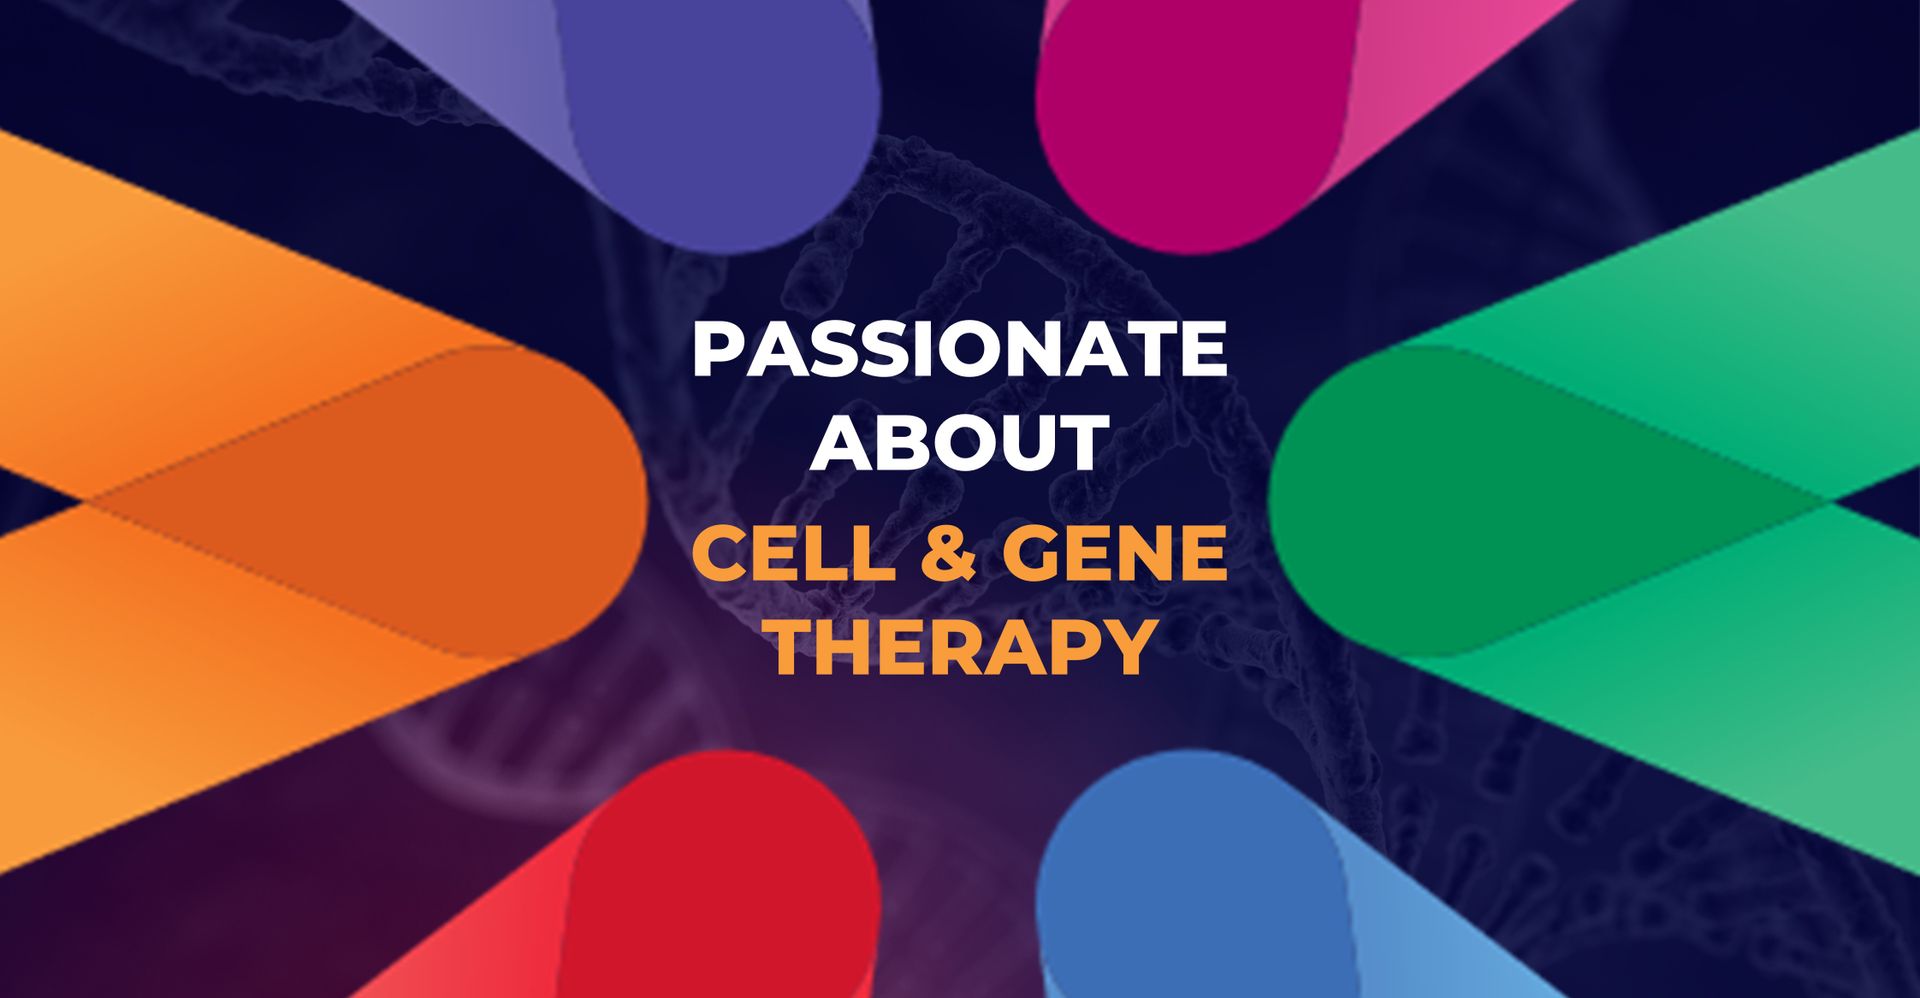 Next Phase - Passionate About Cell And Gene